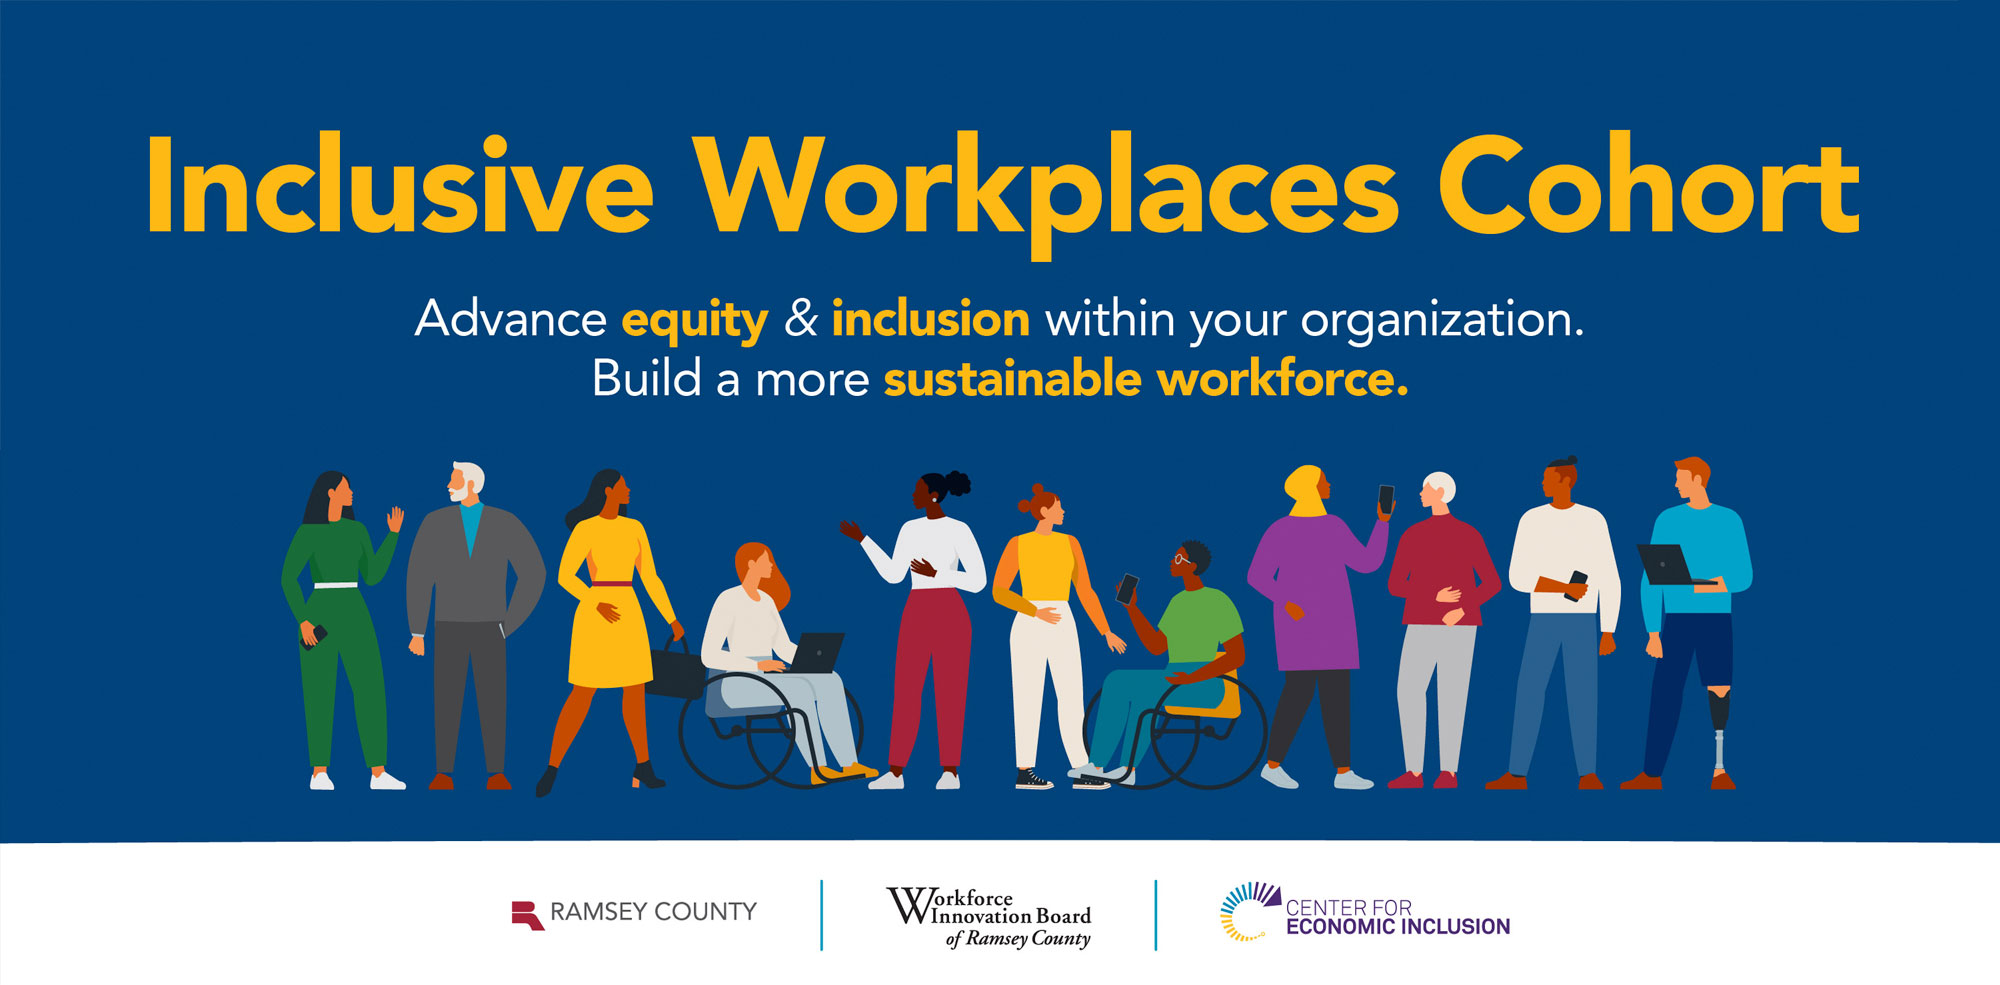 Inclusive Workplaces Cohort: Achieving Equity Together 